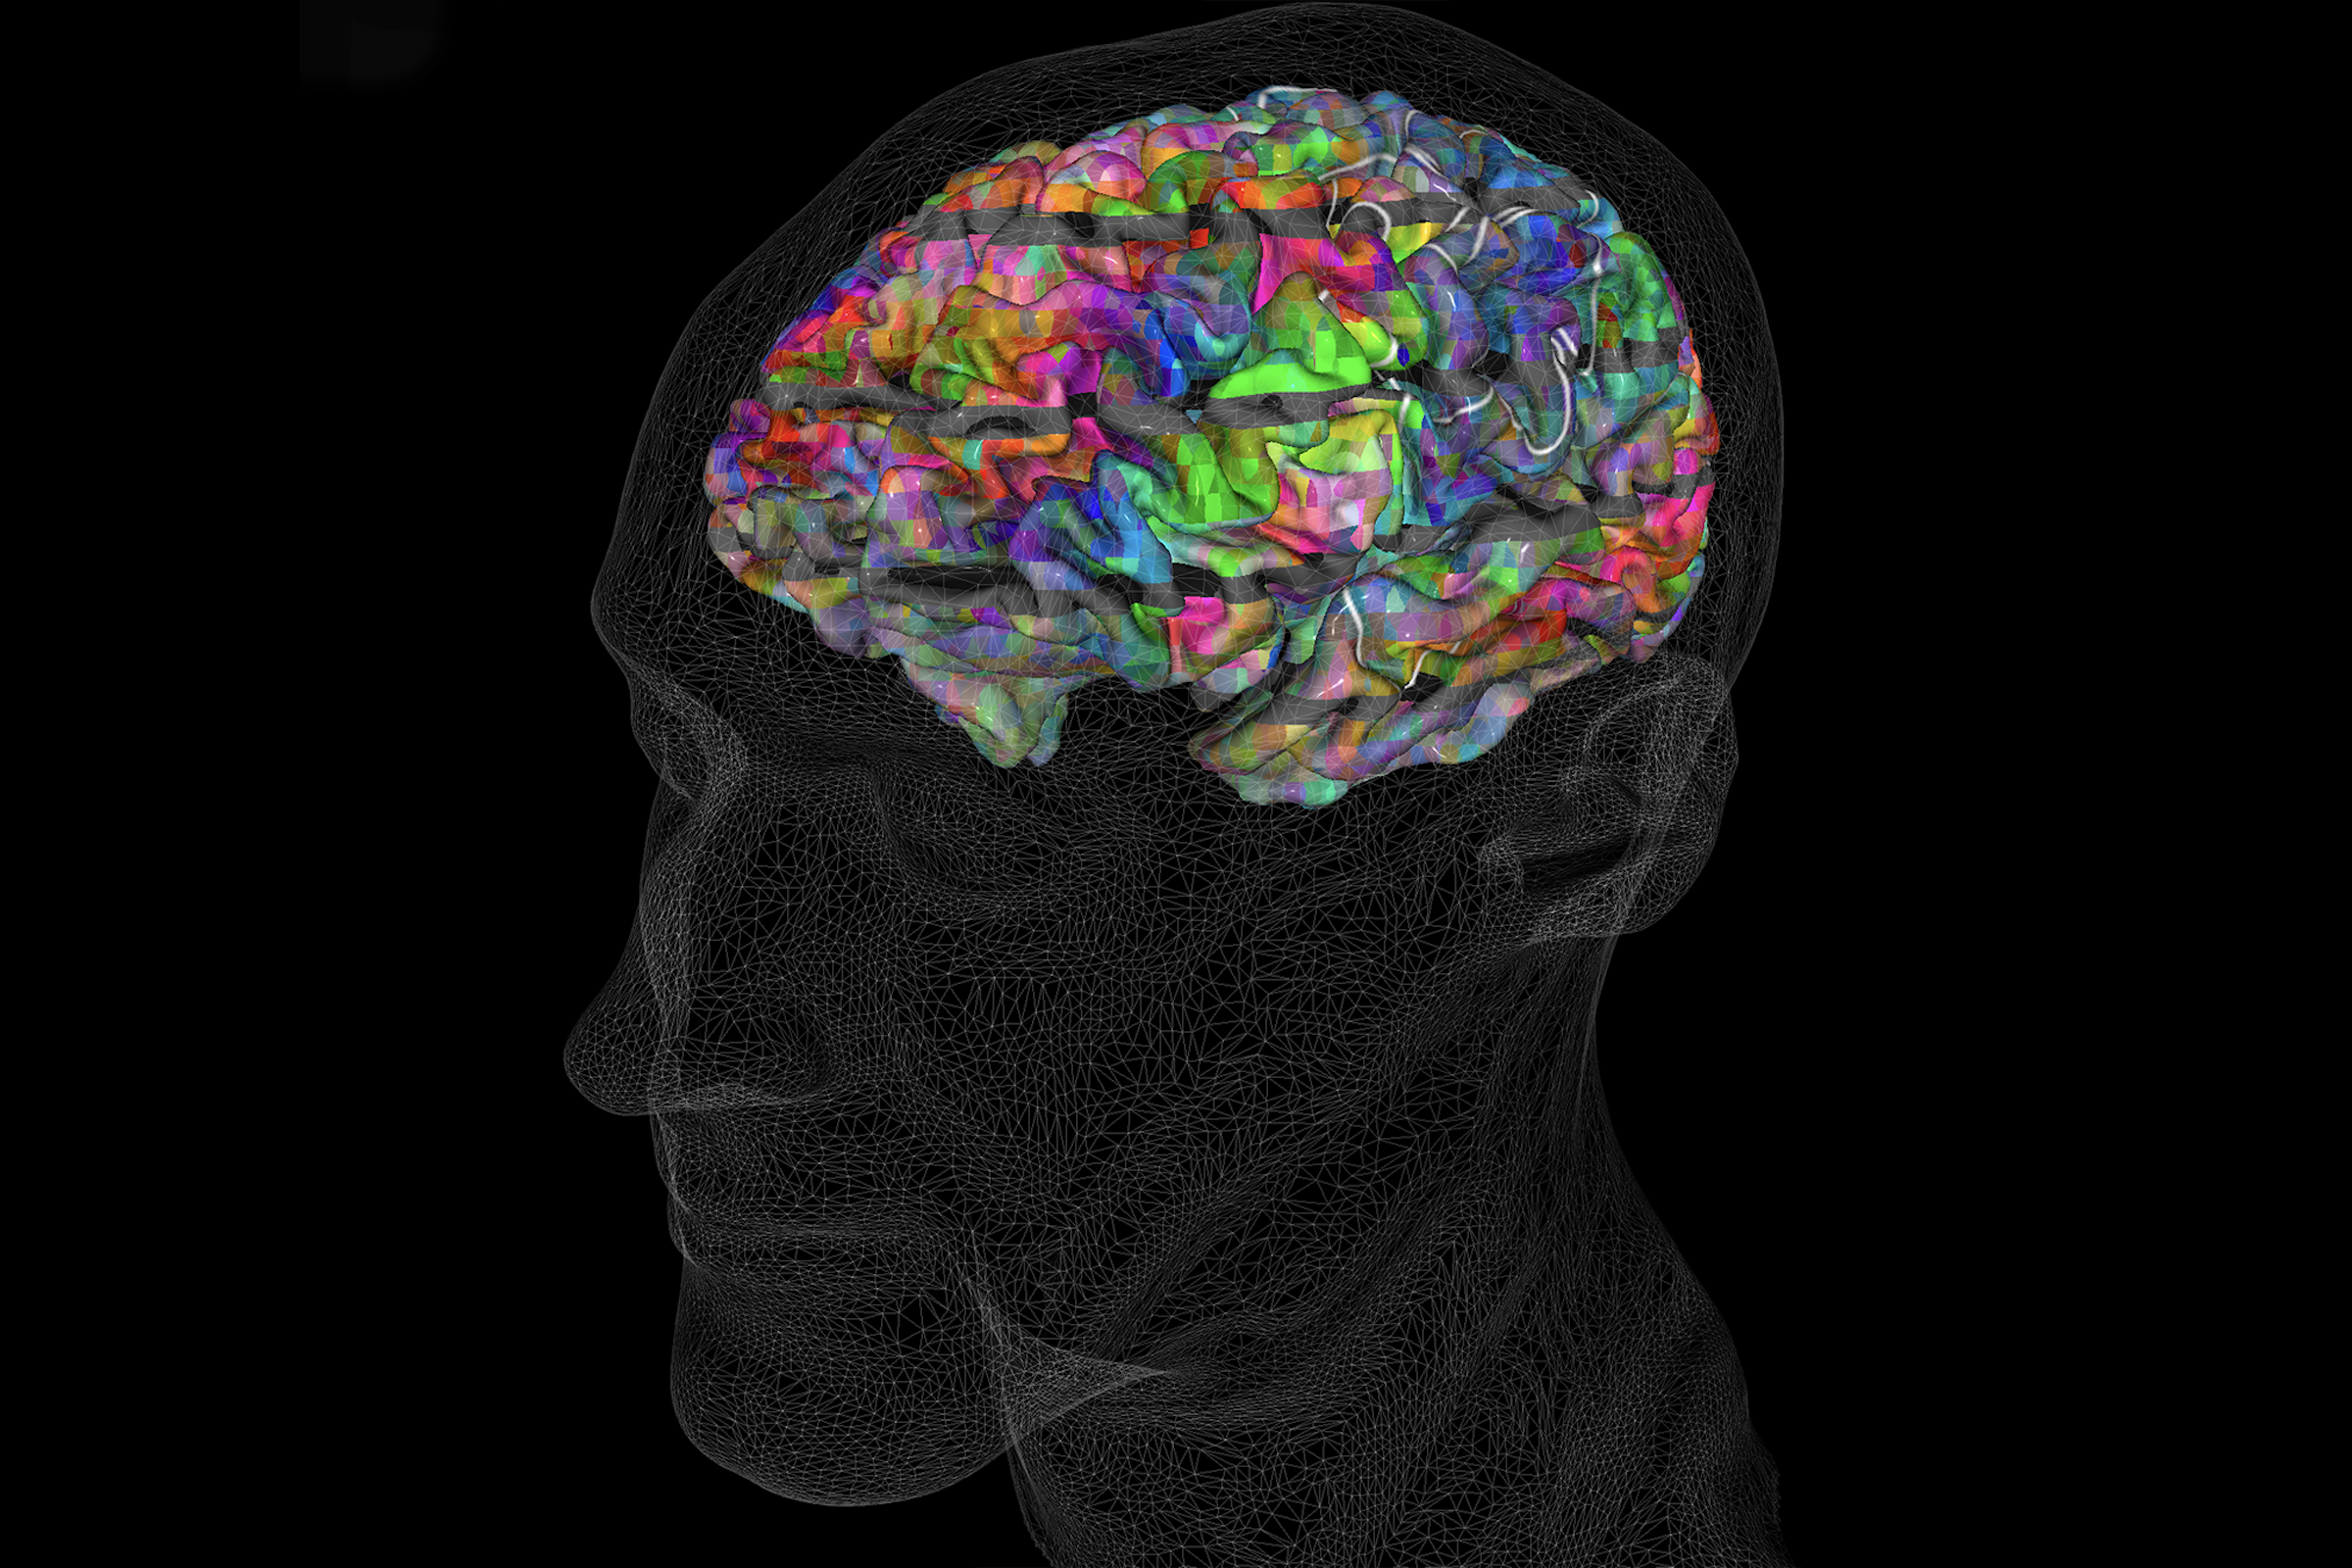 Illustration of a brain with different regions colored differently